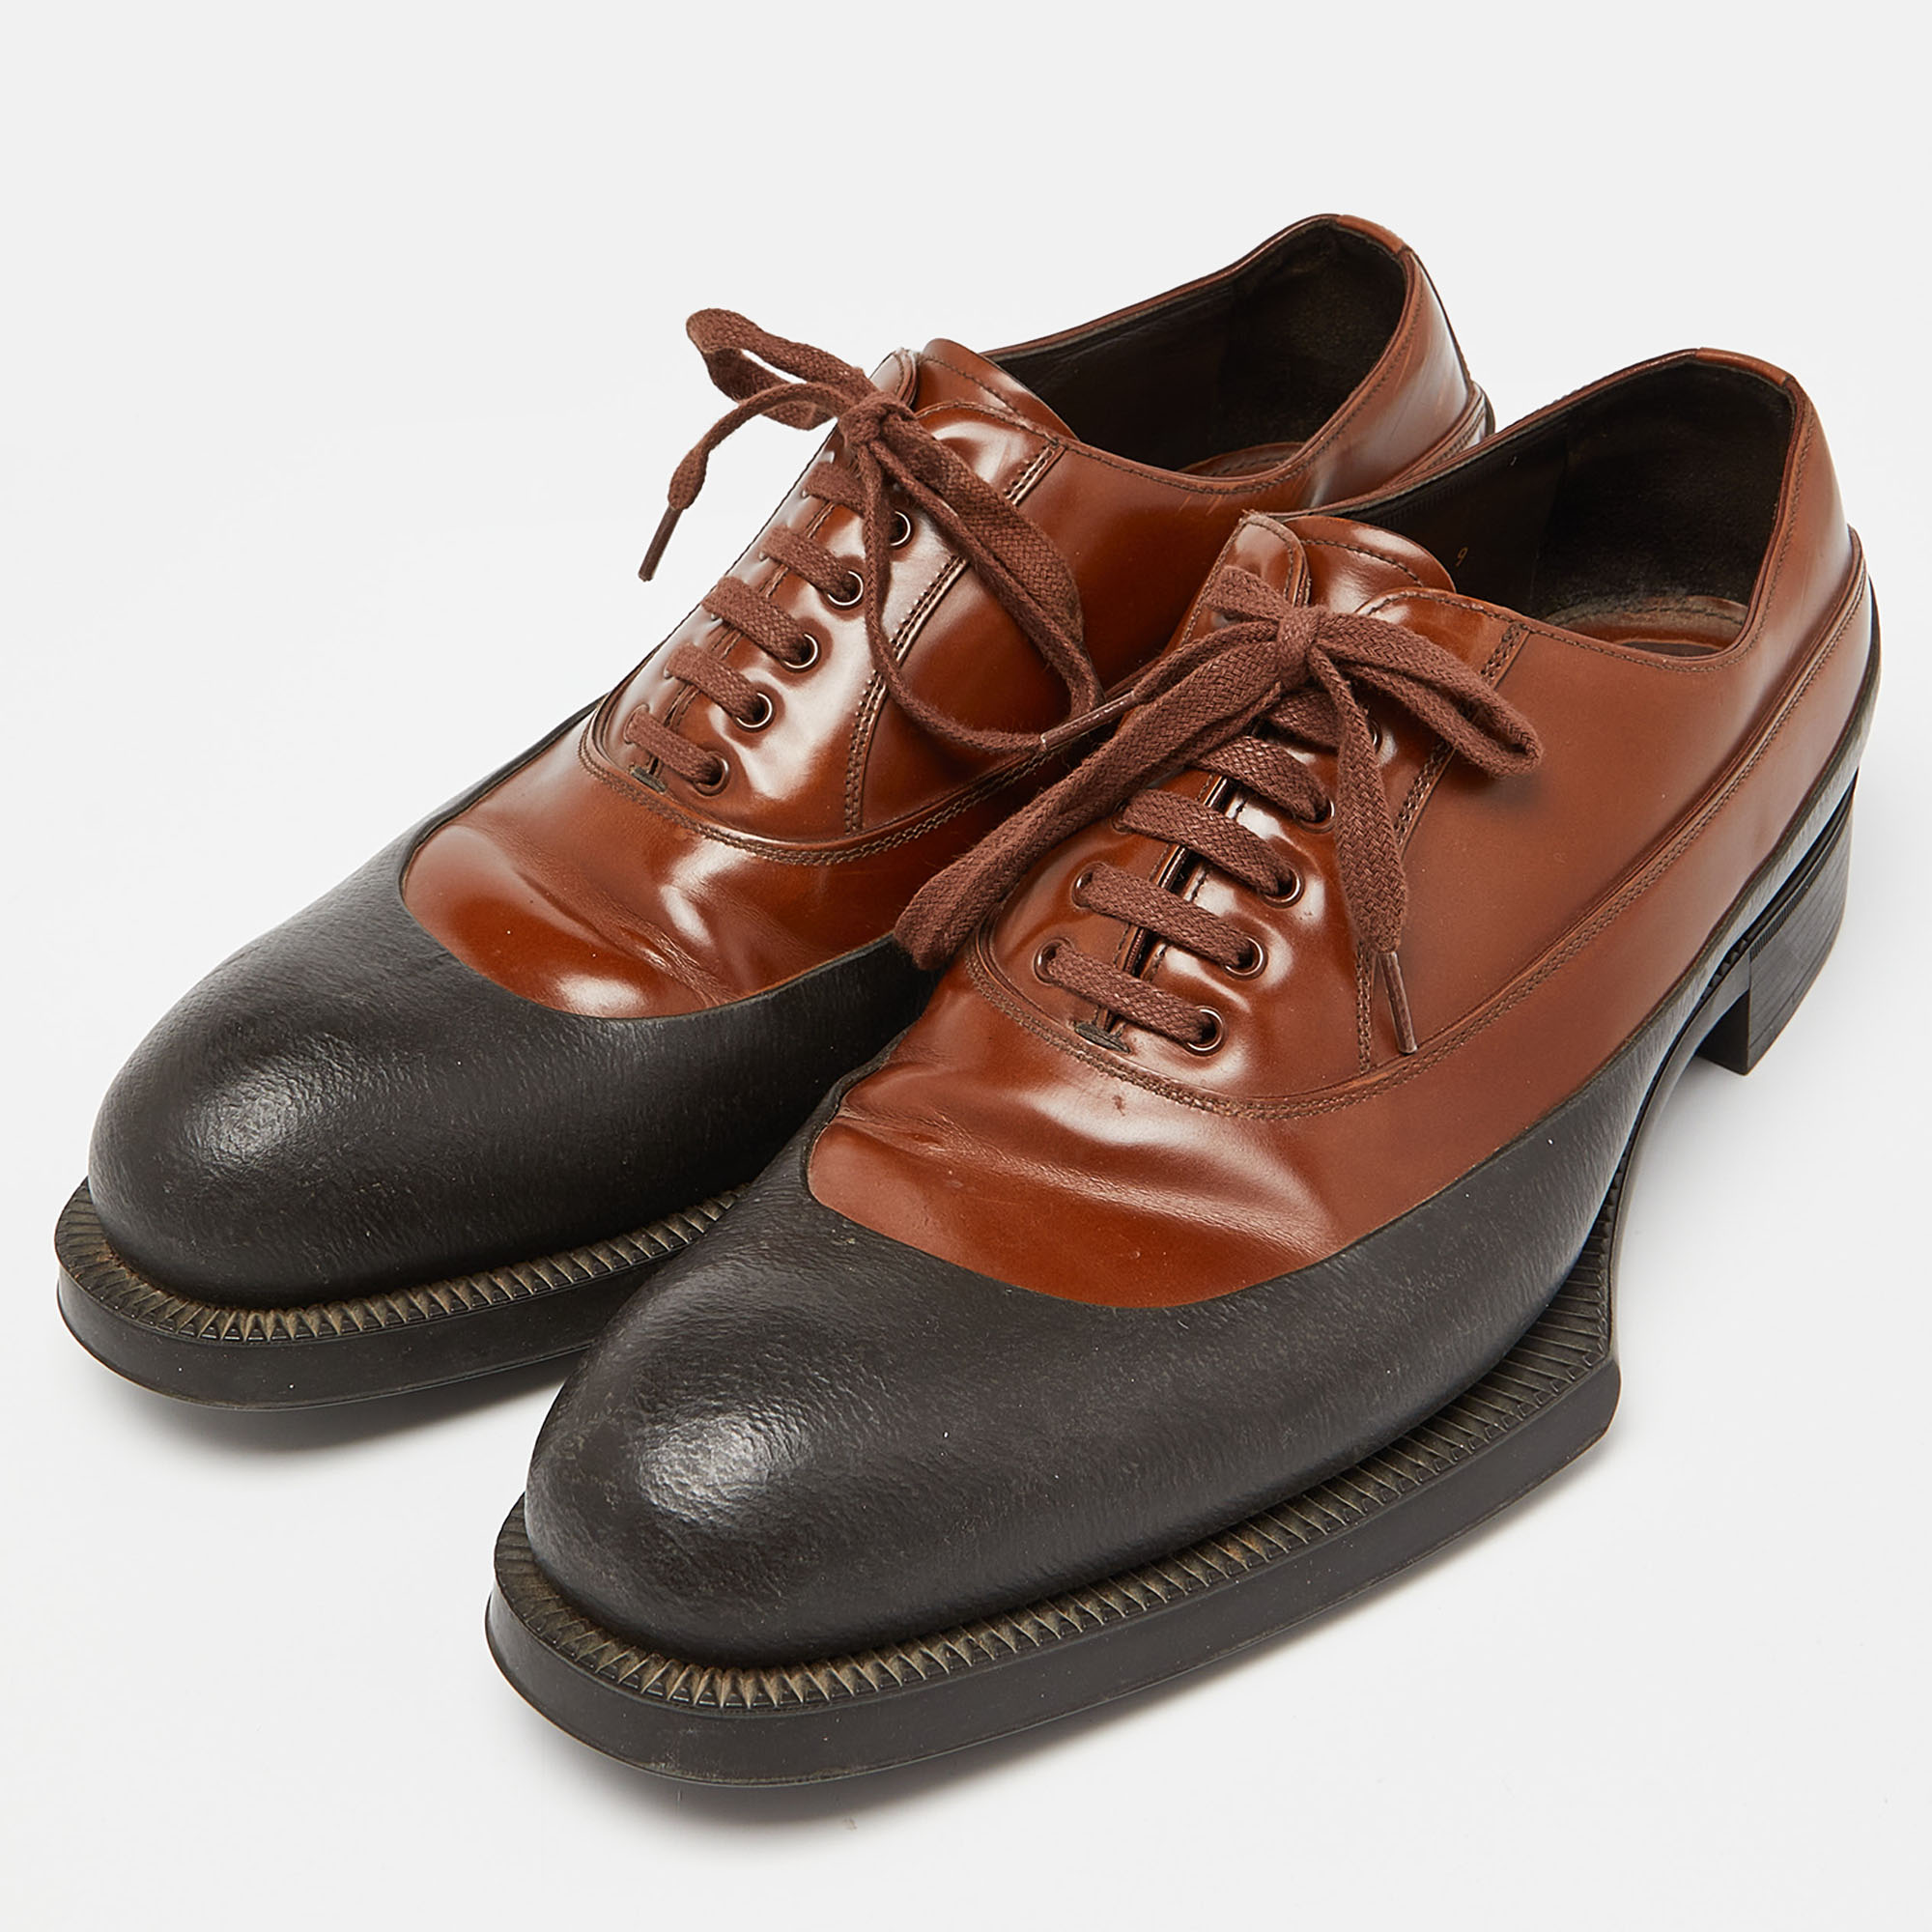 

Prada Brown/Black Leather and Rubber Lace Up Oxfords Size